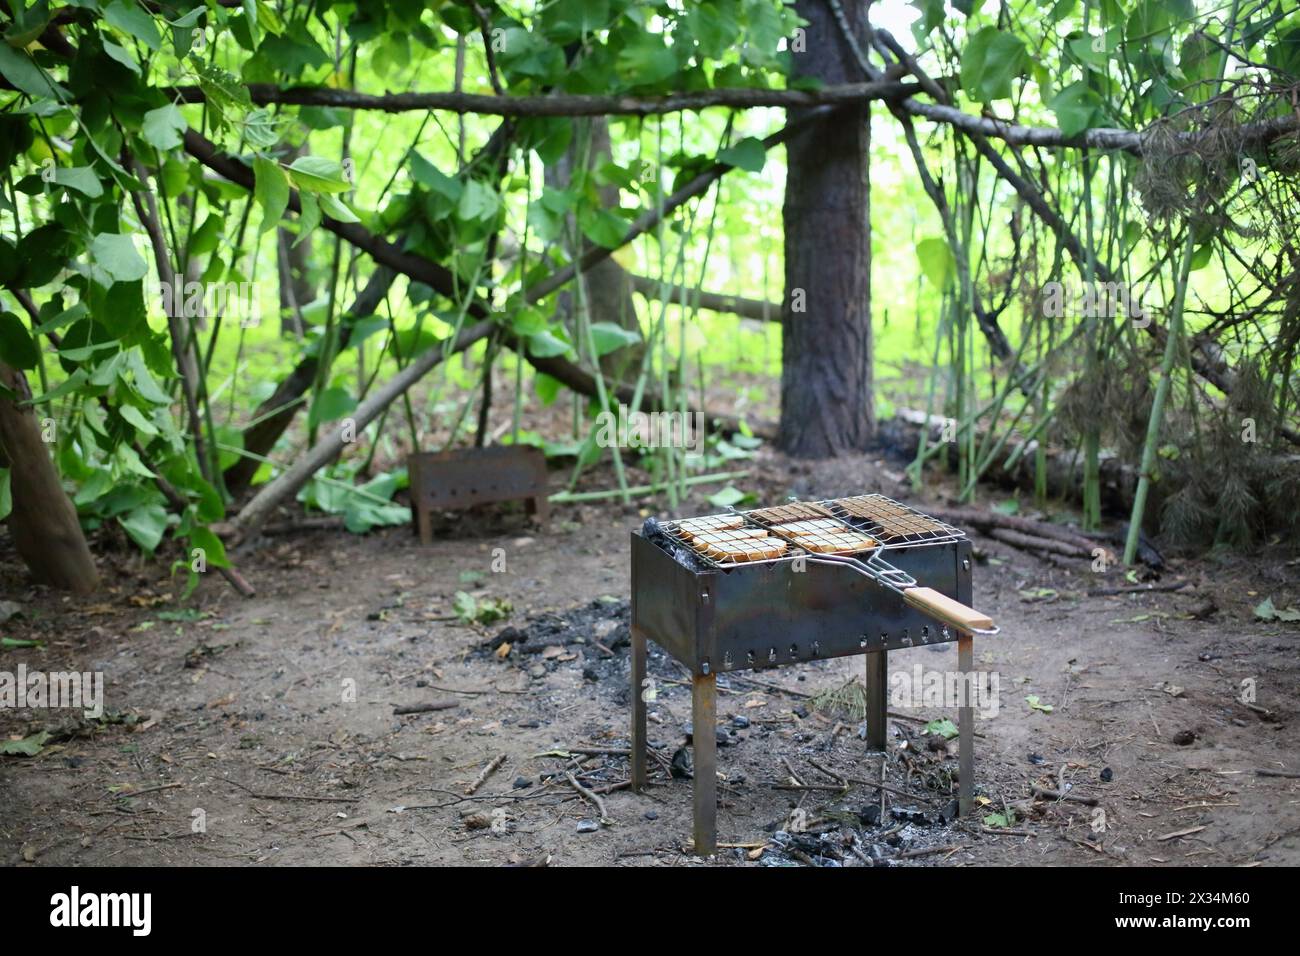 Brazier with grille and slices of bread on a cleared area in the forest Stock Photo